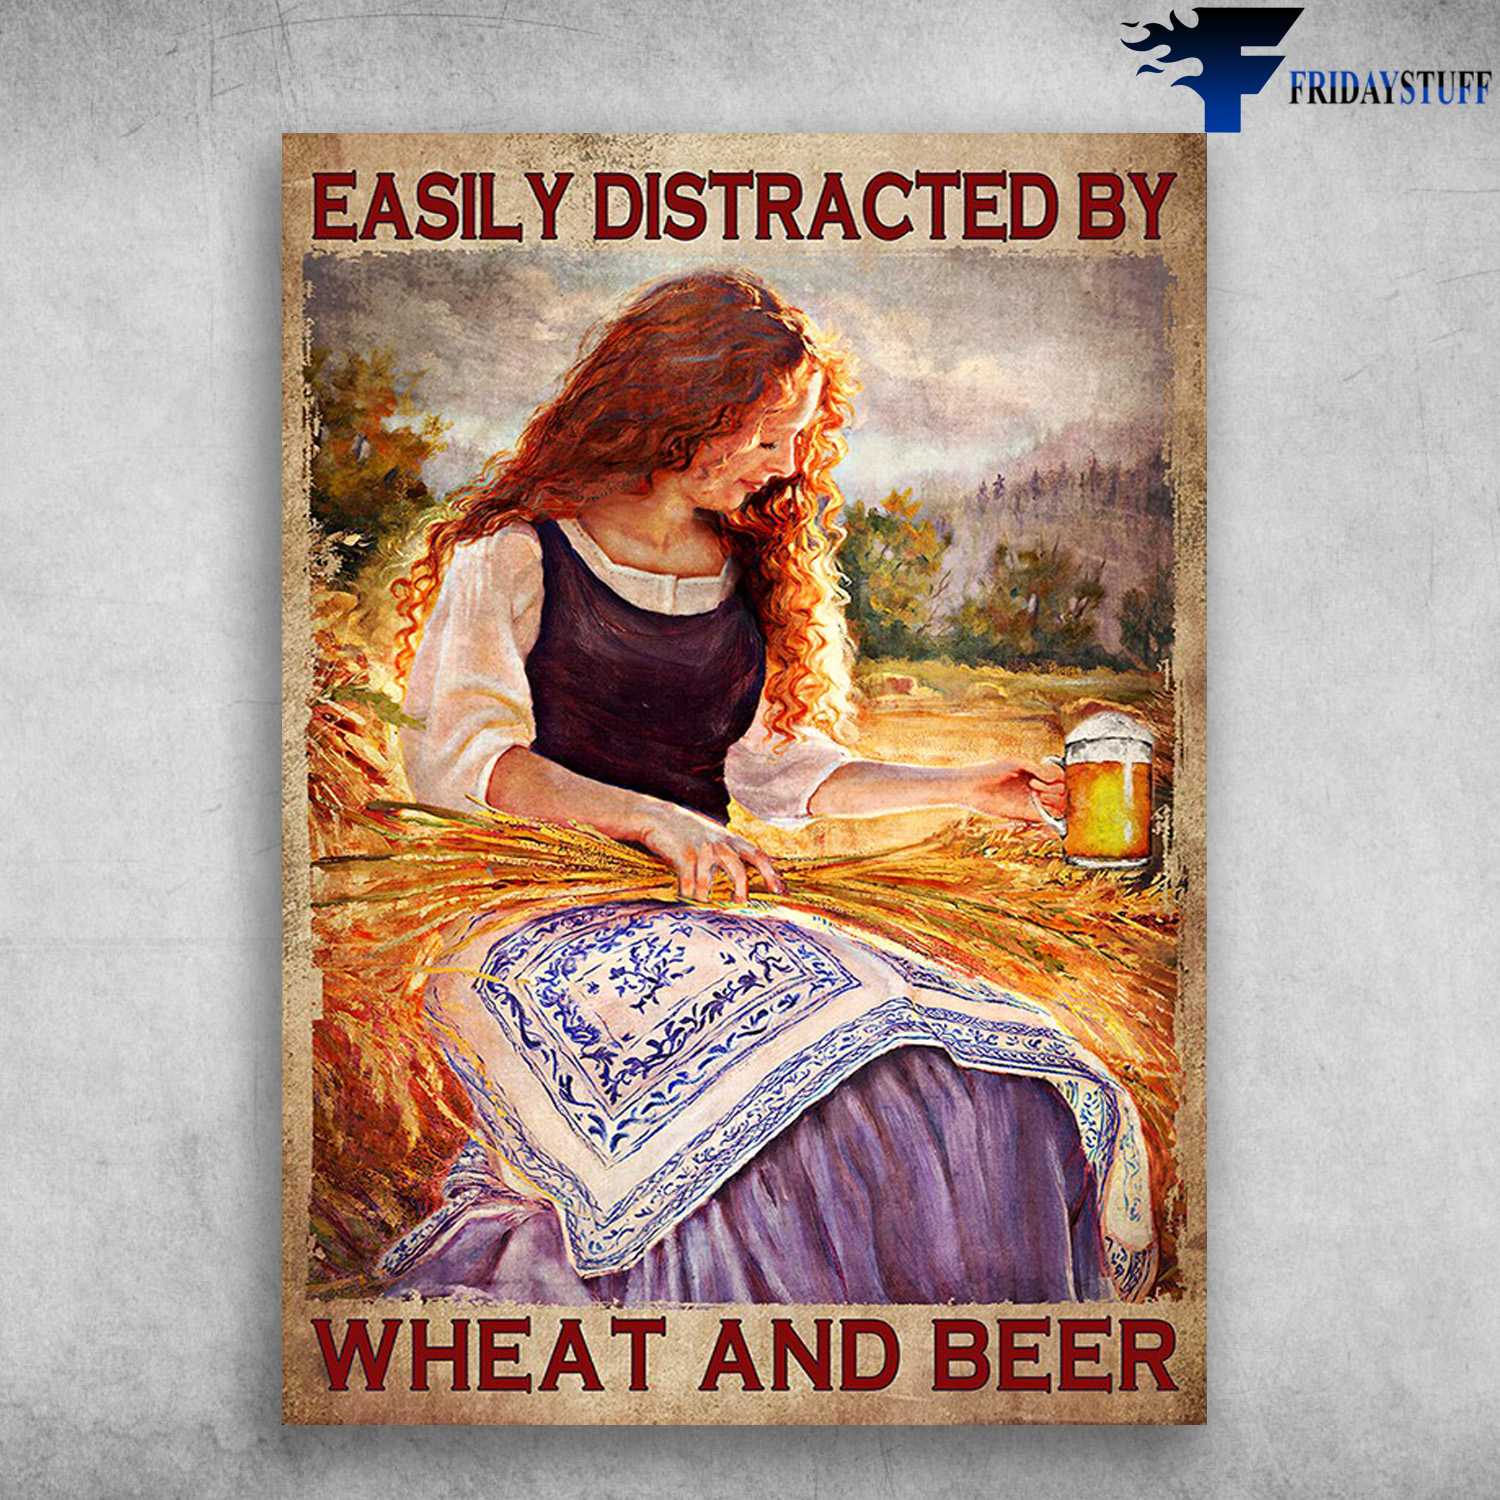 Wheat Field, Lady Drinks Beer - Easily Distracted By, Wheat And Beer